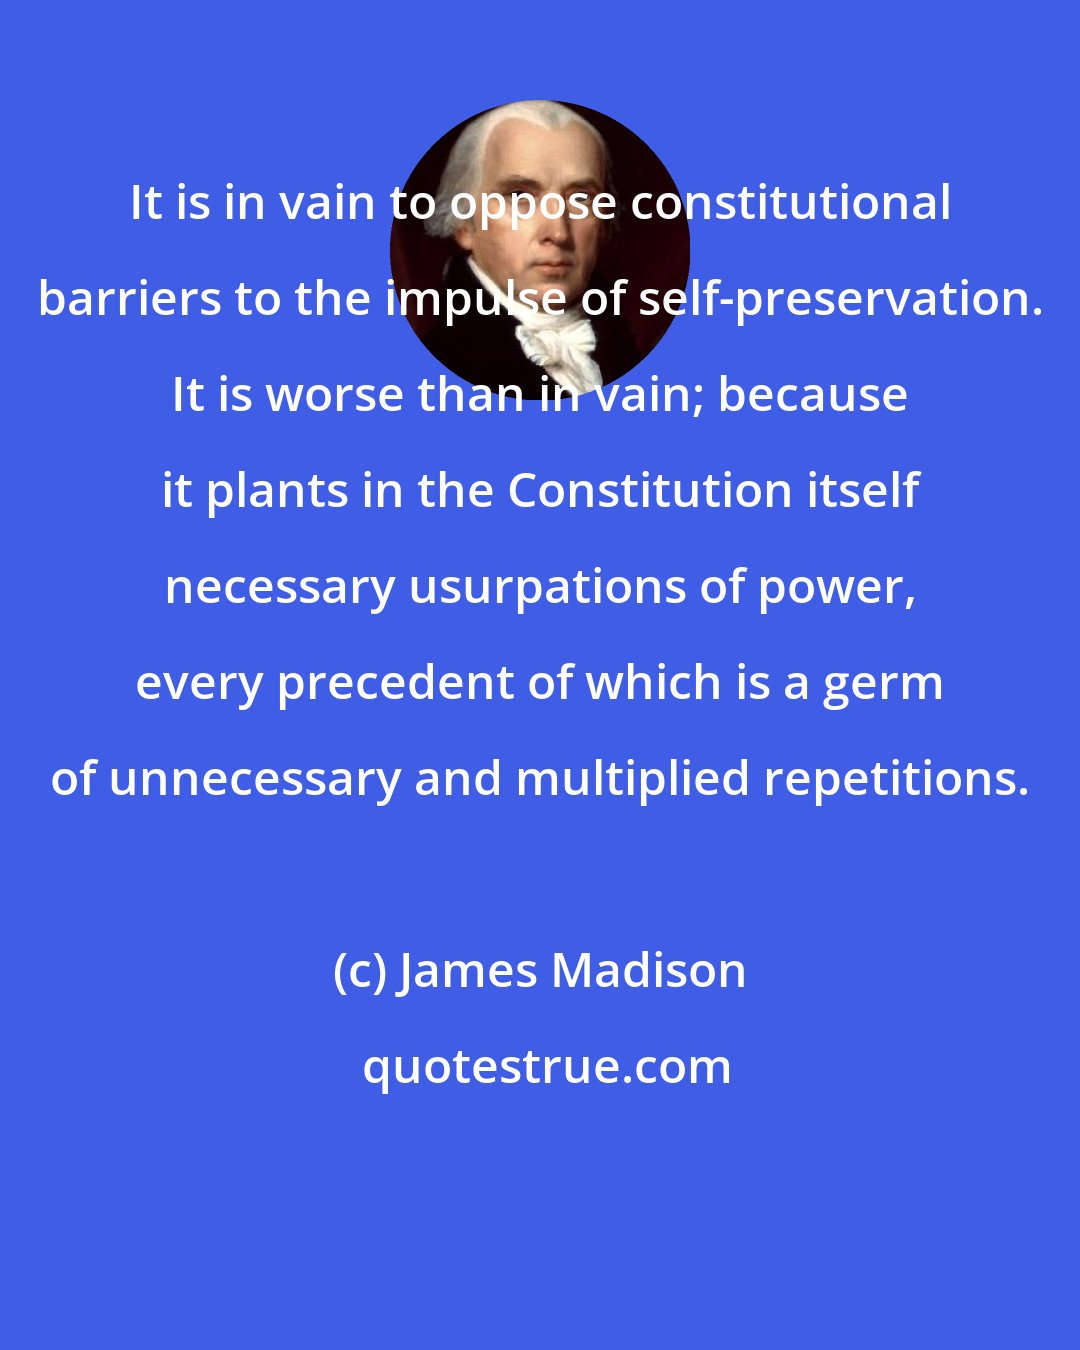 James Madison: It is in vain to oppose constitutional barriers to the impulse of self-preservation. It is worse than in vain; because it plants in the Constitution itself necessary usurpations of power, every precedent of which is a germ of unnecessary and multiplied repetitions.